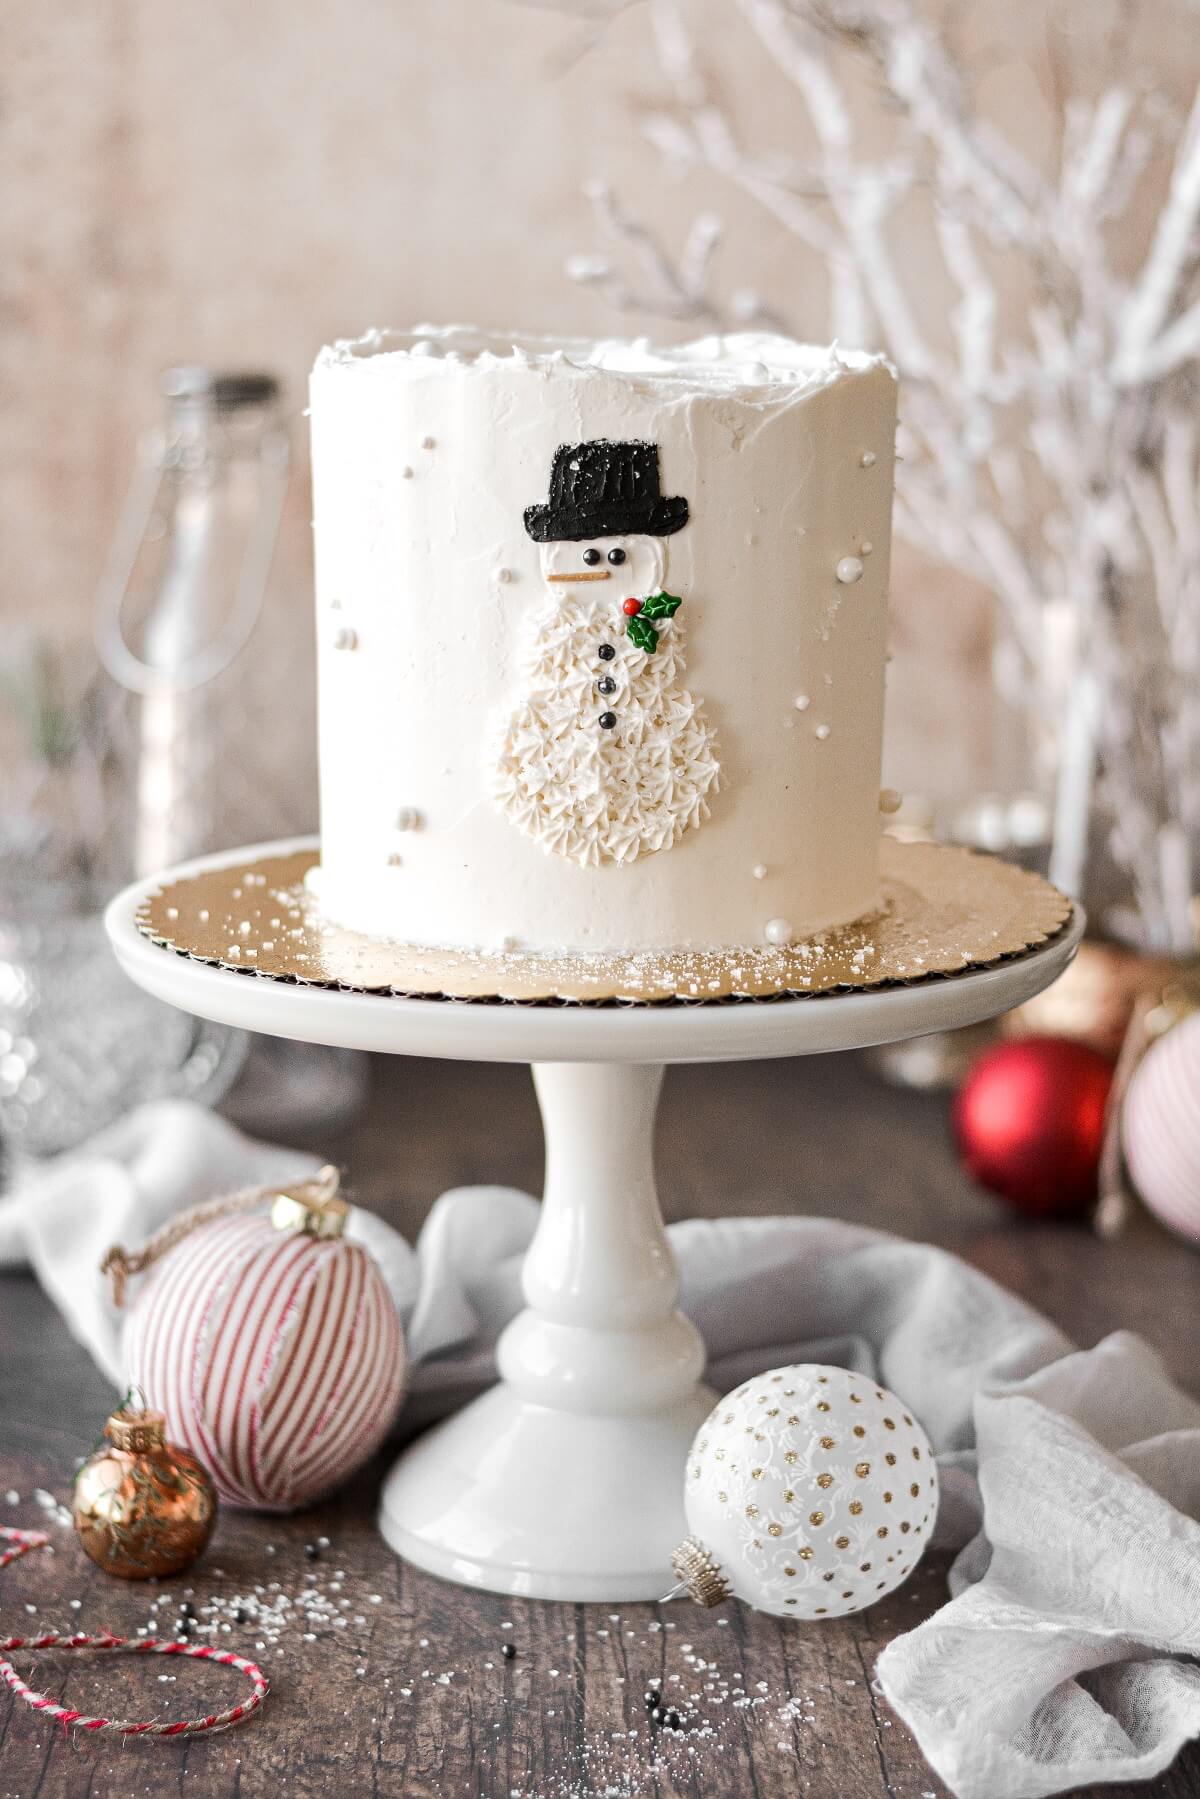 A snowman cake on a white cake stand surrounded by Christmas ornaments.